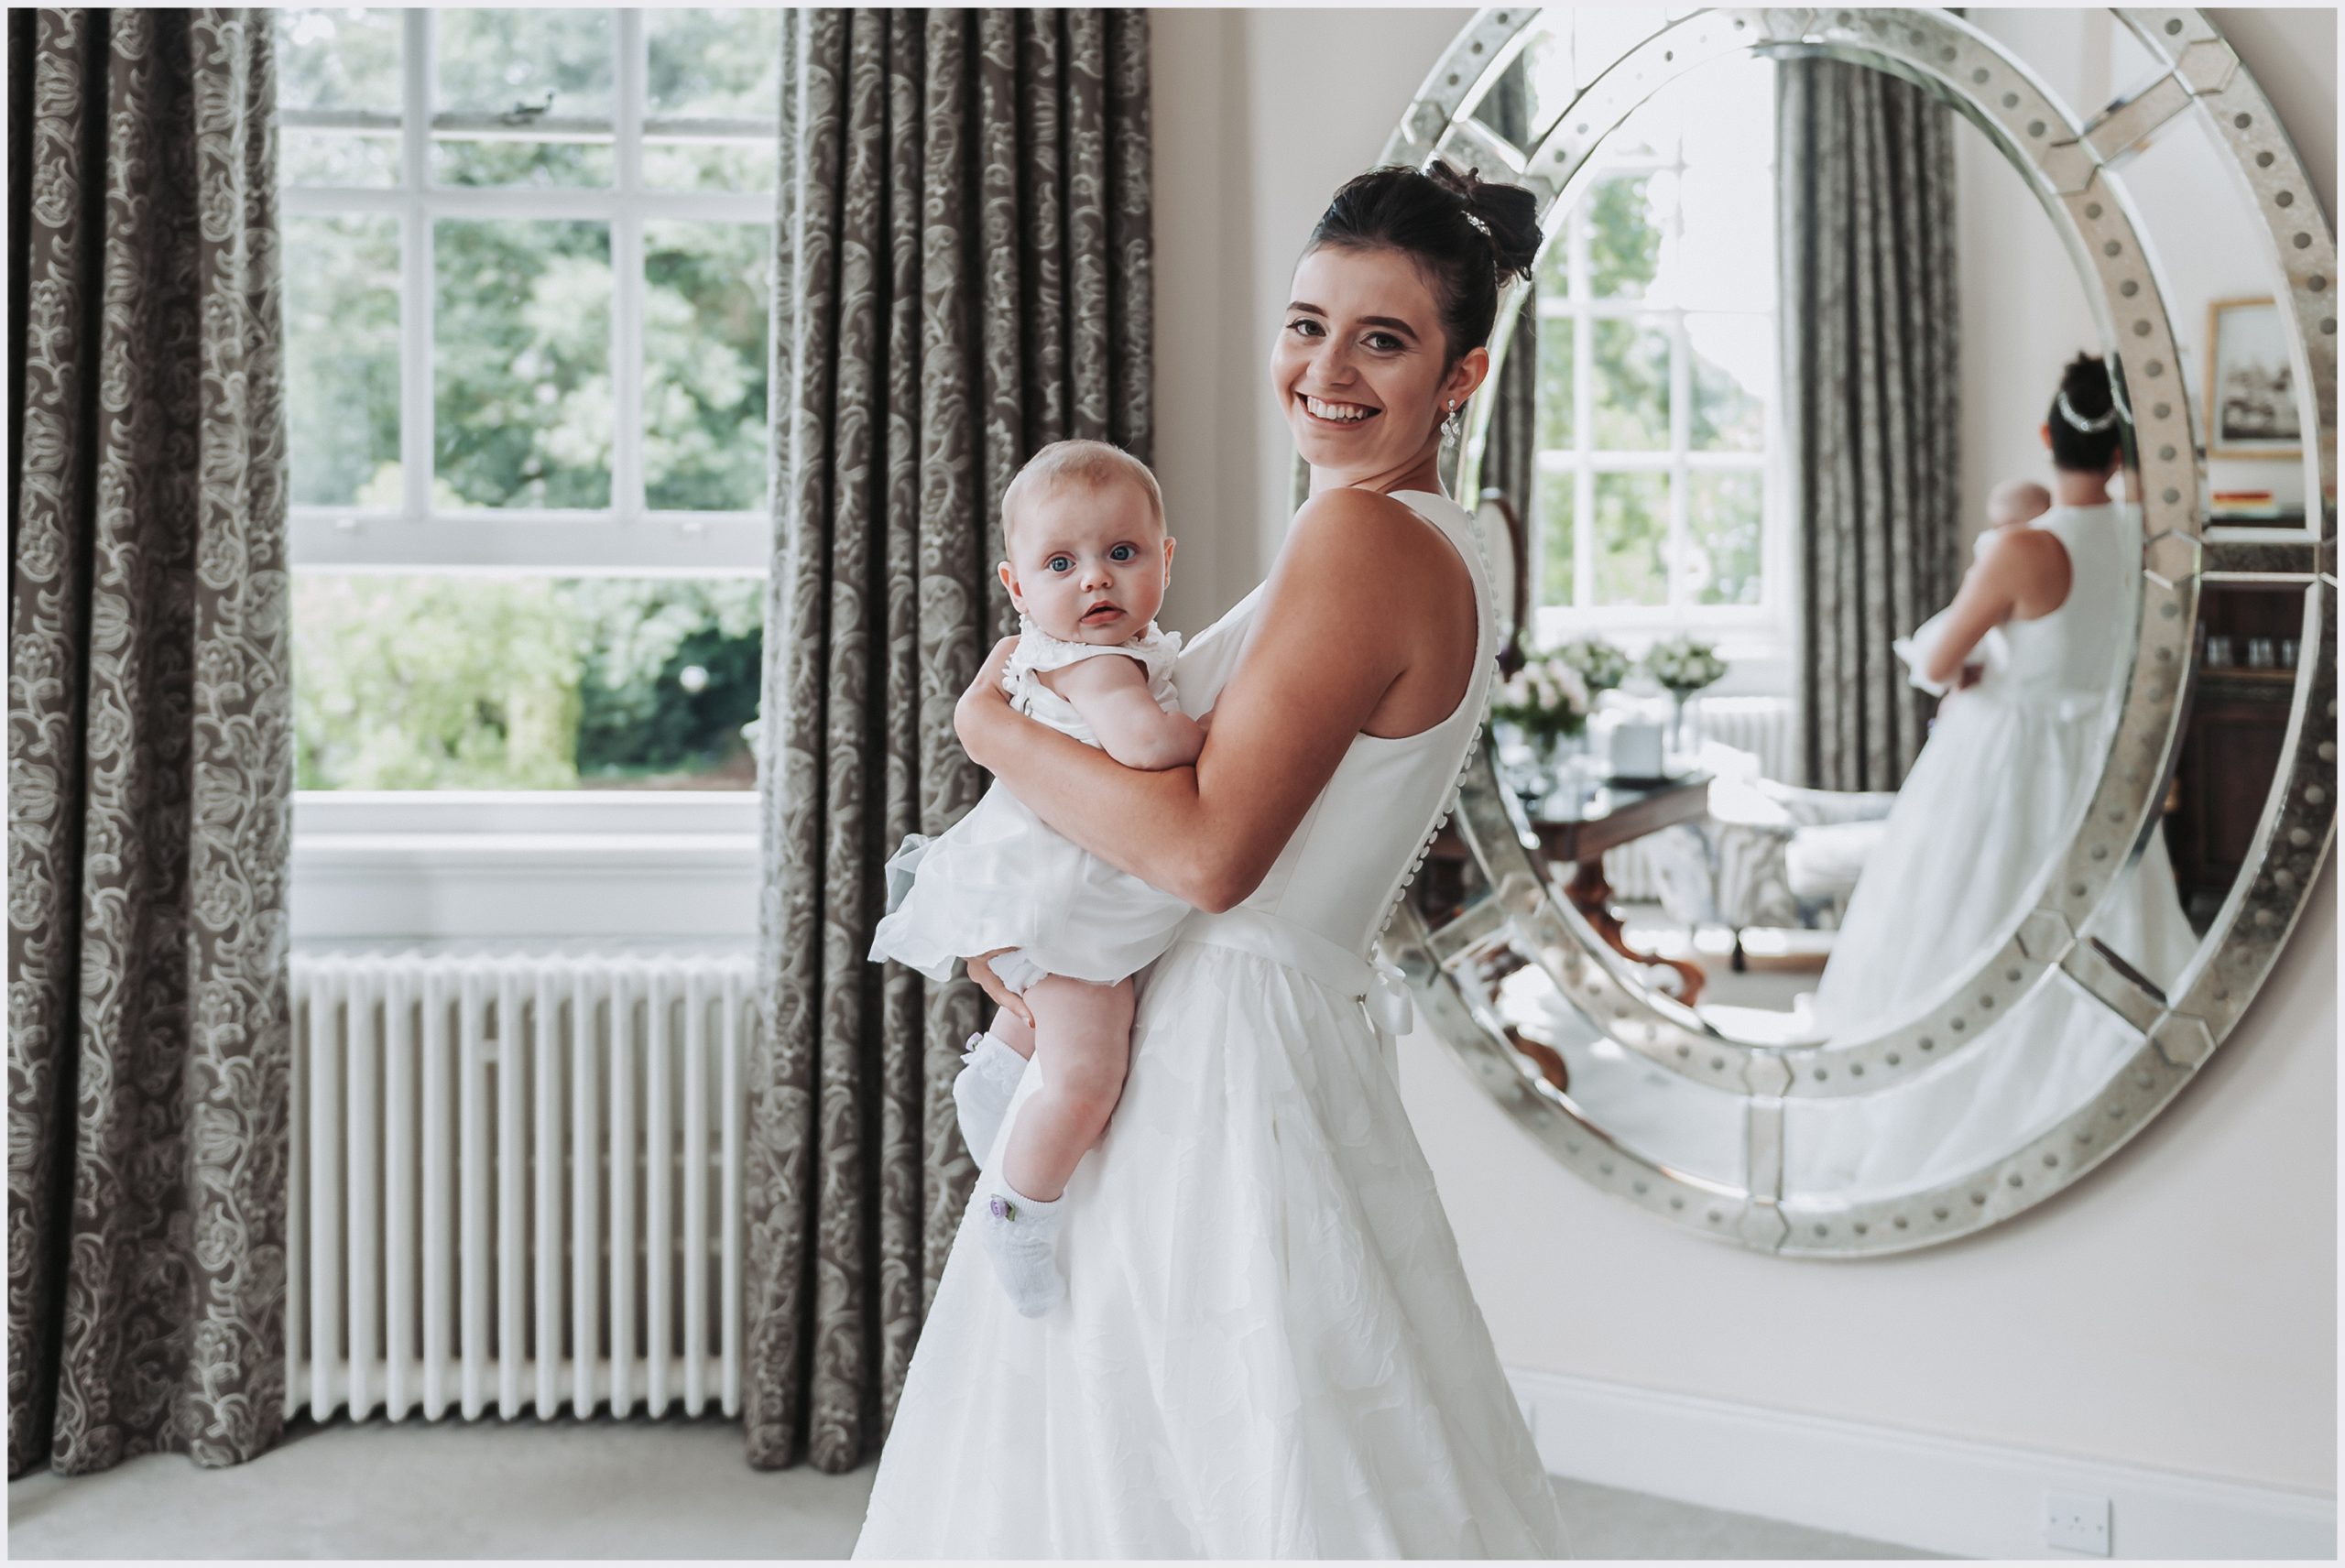 A beautfiul bride and her daughter pose for a wedding portrait in the beautiful dressing room at Iscoyd Park on the morning of her wedding.  Image captured by Helena Jayne Photography